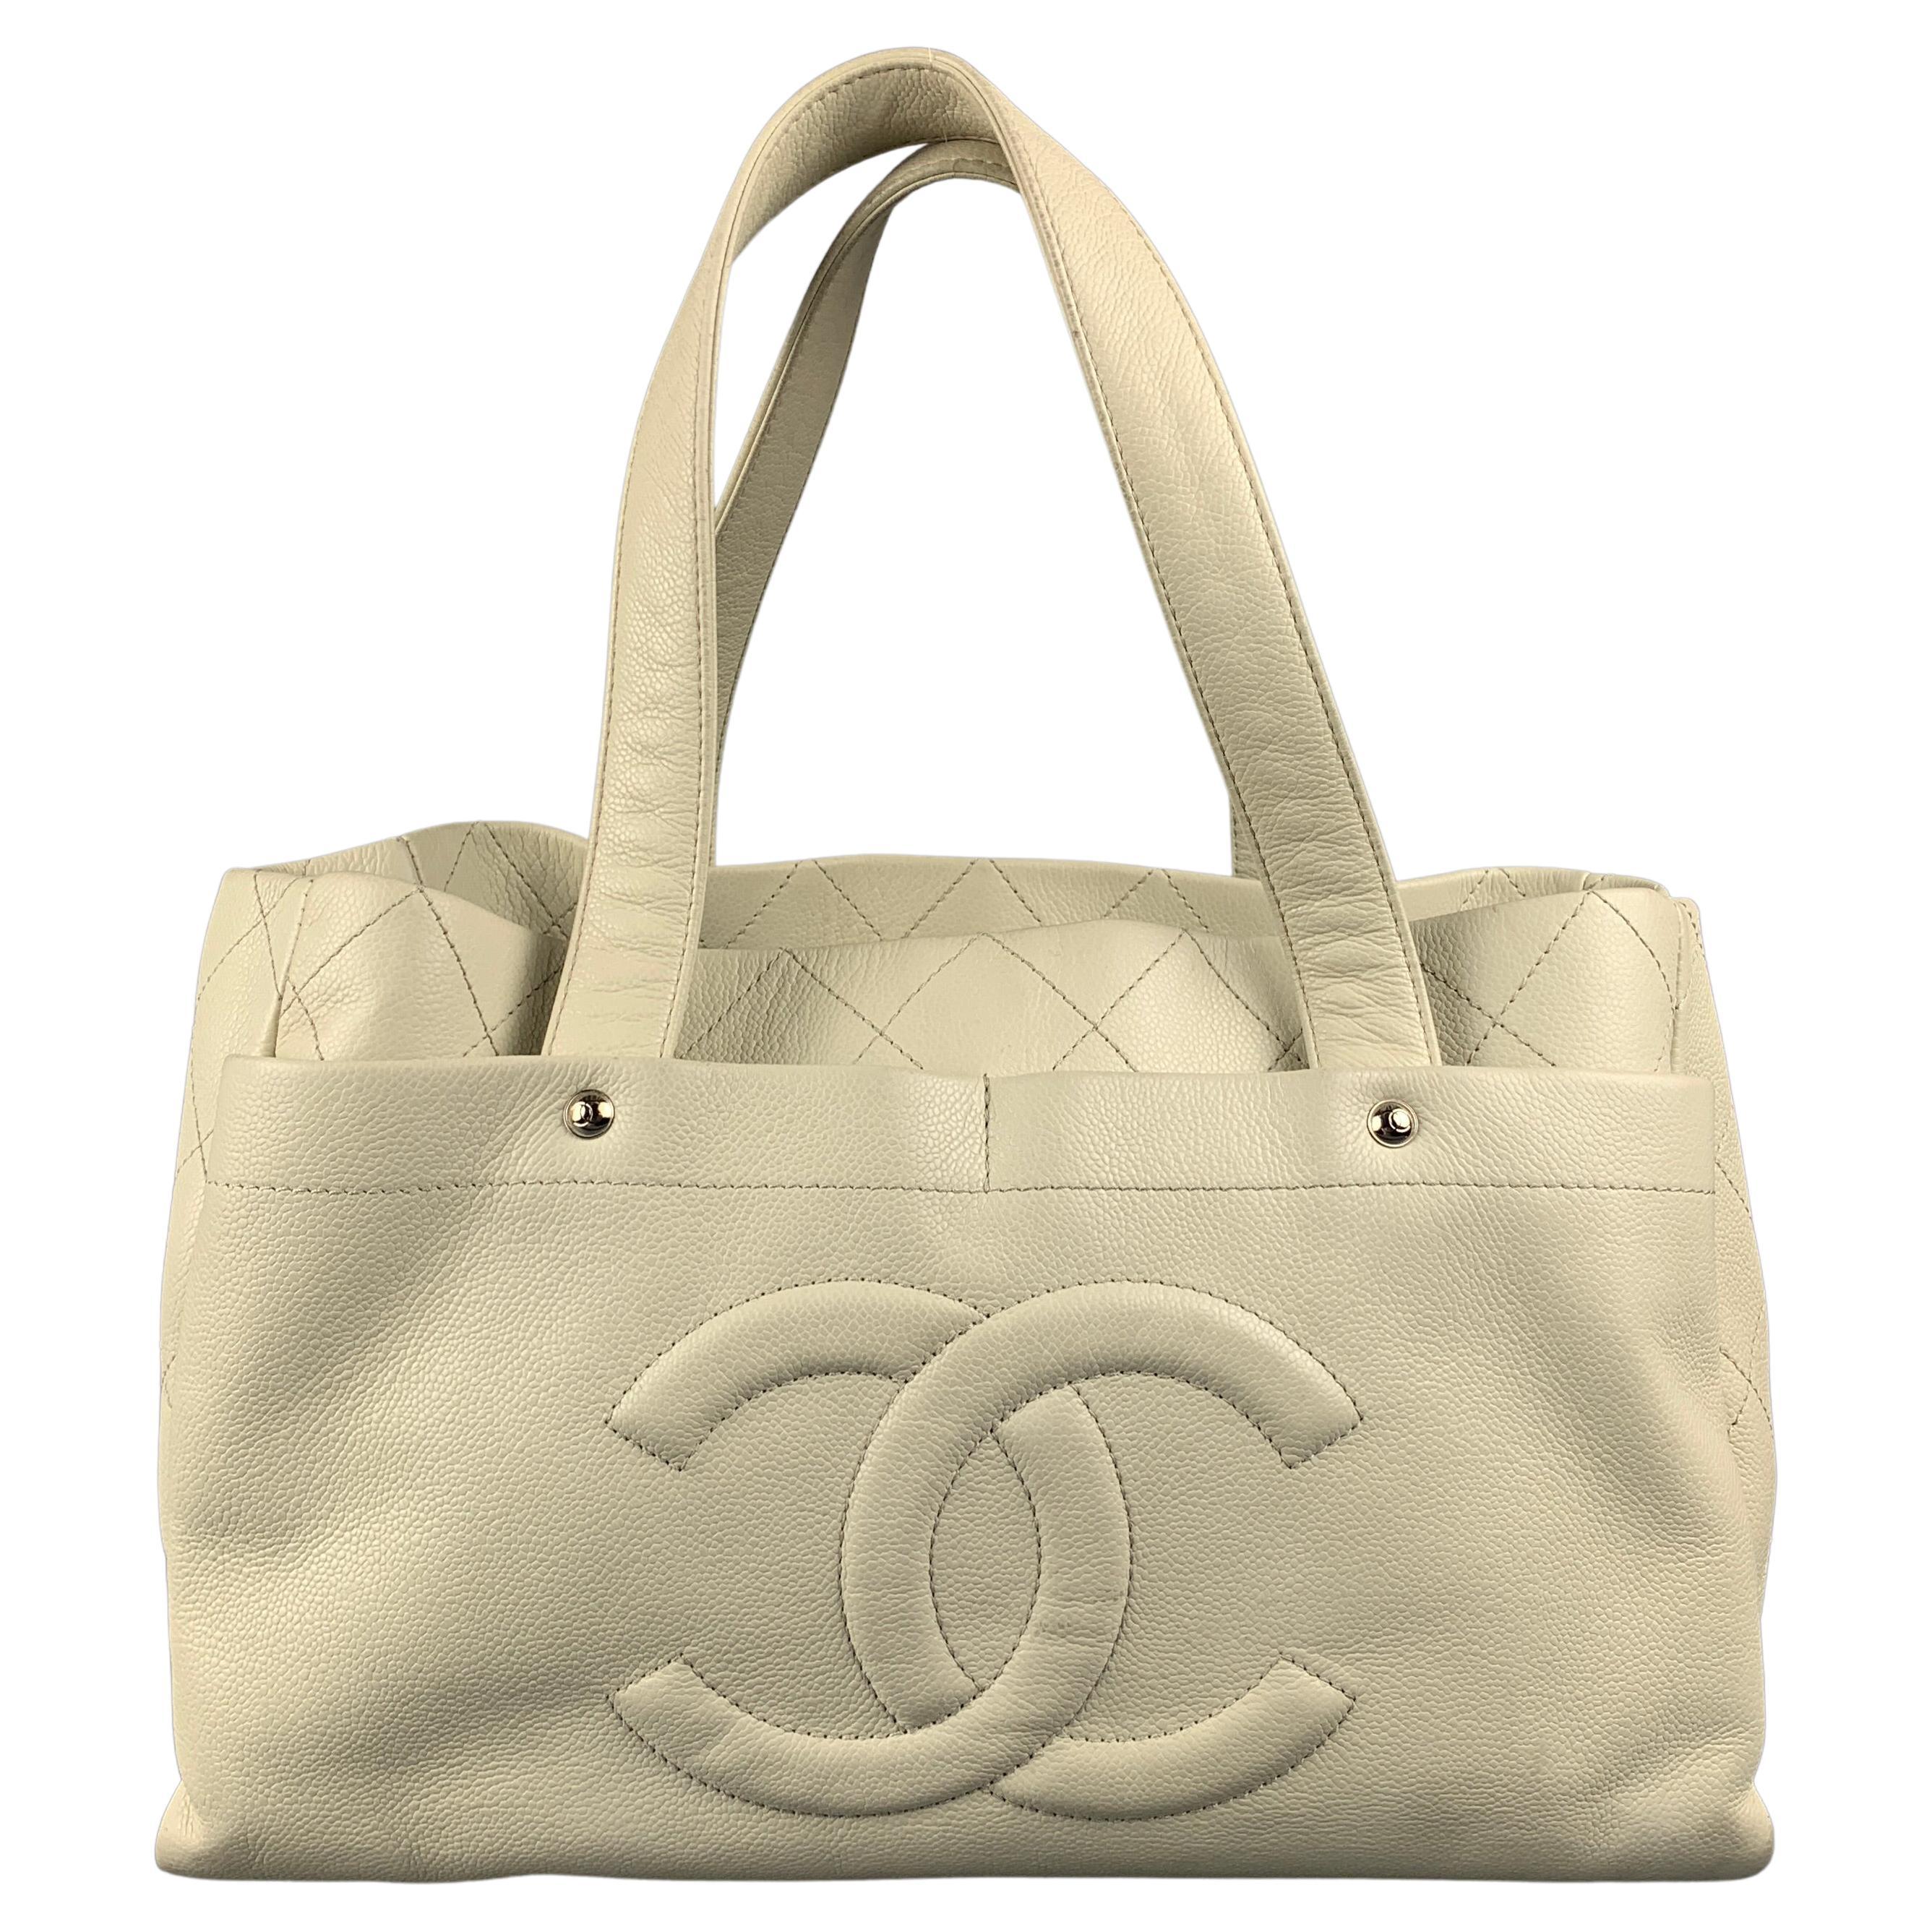 CHANEL Ivory Quilted Leather Tote Handbag